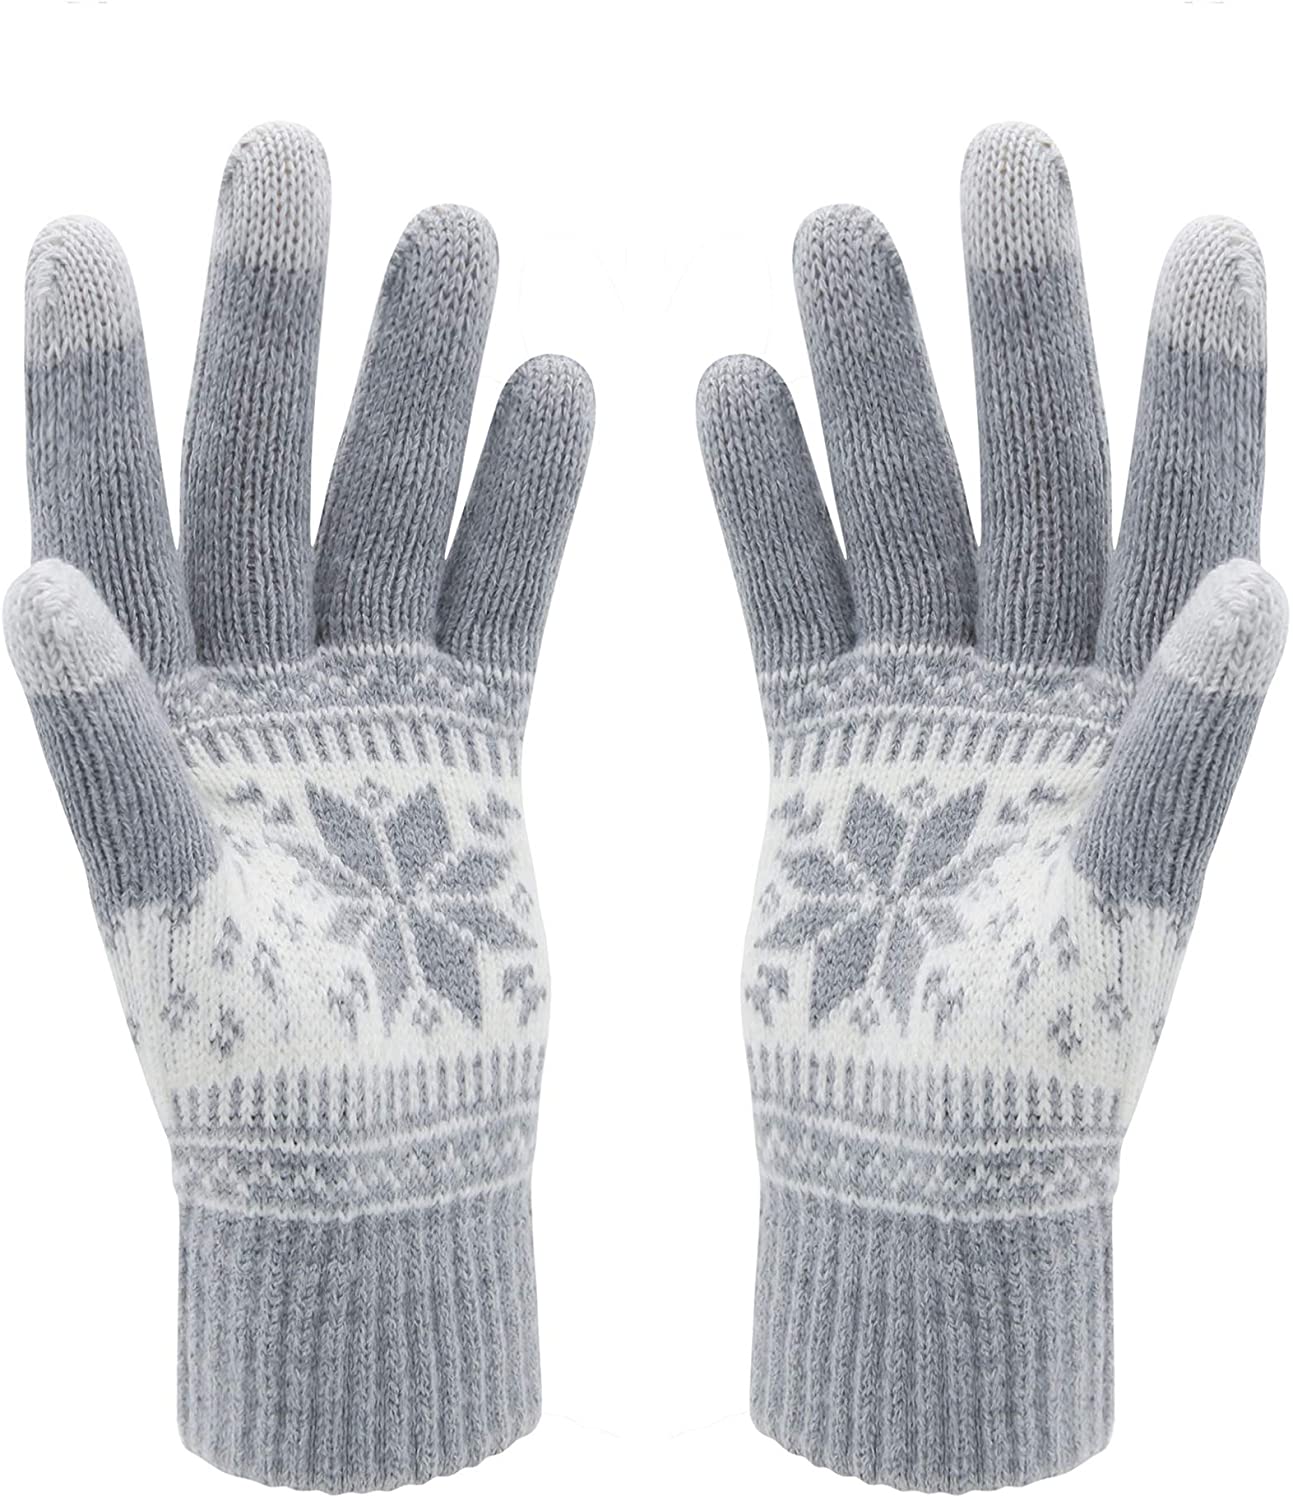 Winter Touch Screen Gloves HÖTER Snow Flower Printing Keep Warm for Women  and Me | eBay